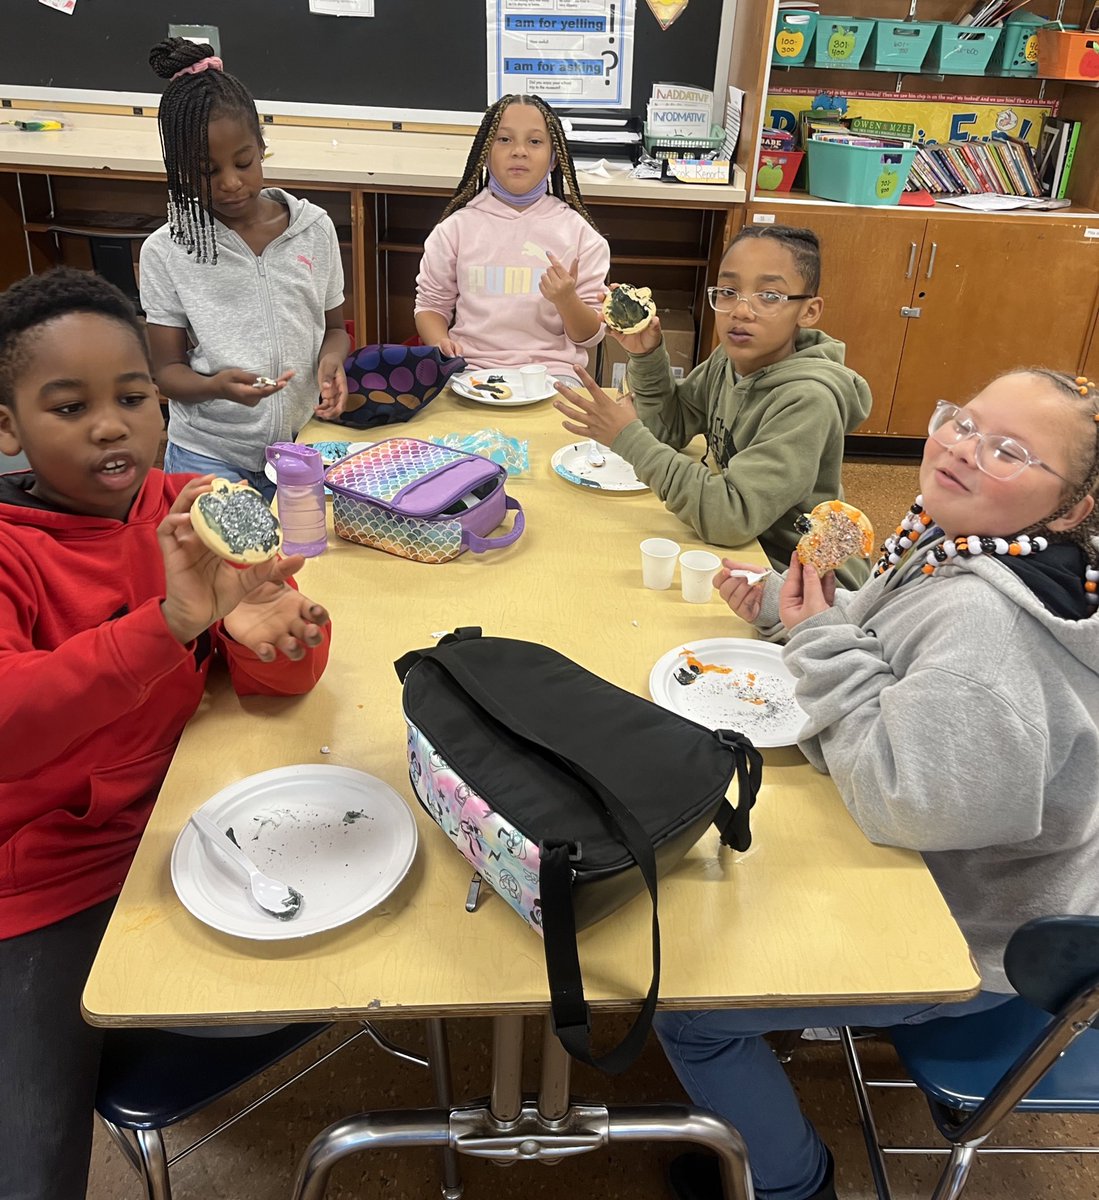 I decorated cookies with my fun Friday kiddos ❤️ We also decided to start a Kindness Krew at recess 👀 👀 #KindnessMatters #kindkrew #funfriday @PPSnews @8Pittsburgh